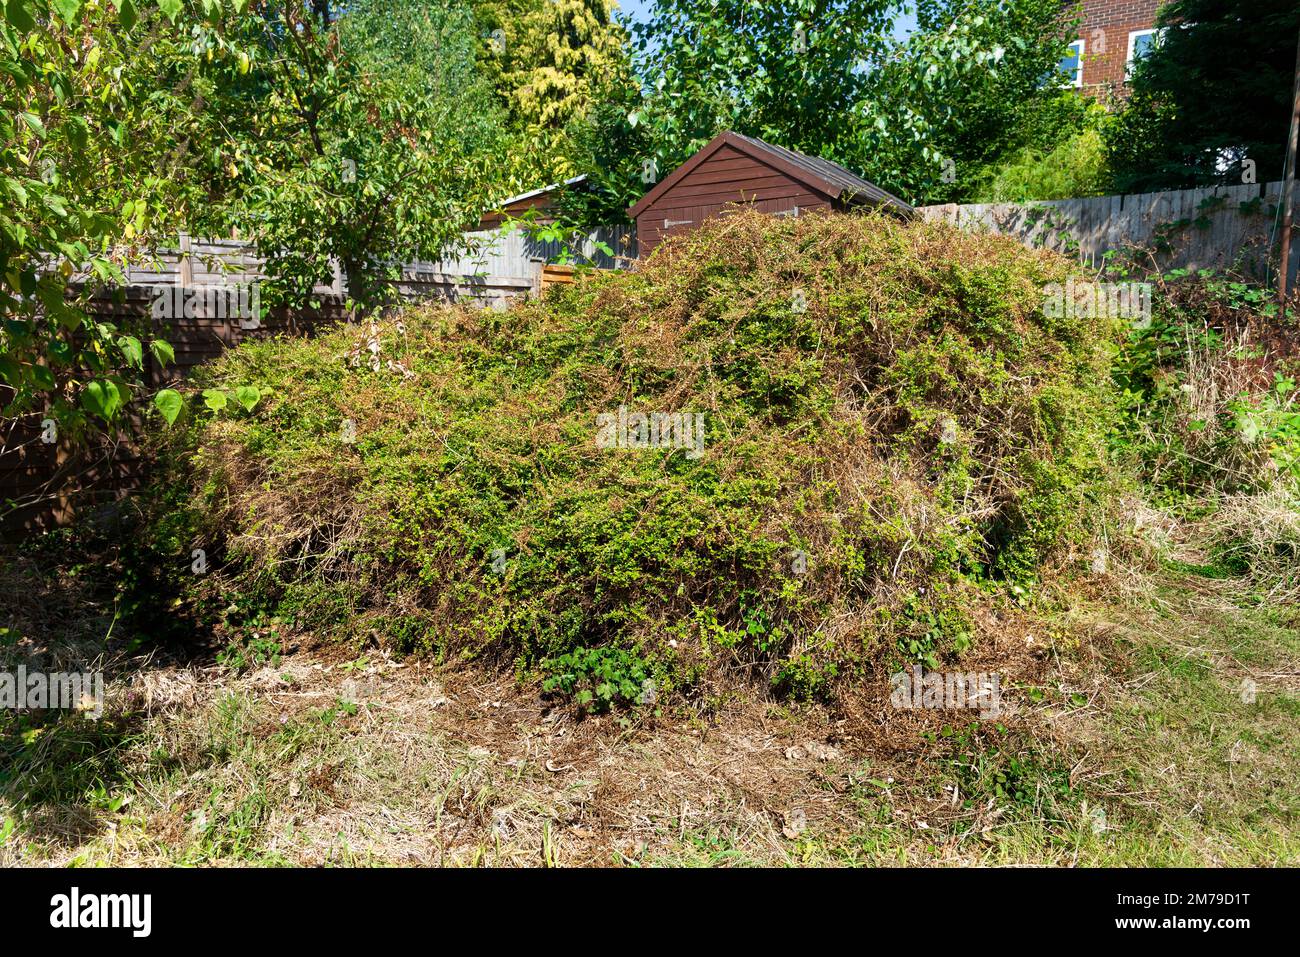 Overgrown and neglected domestic urban back garden with wooden shed, Reading, Berkshire, England, UK Stock Photo